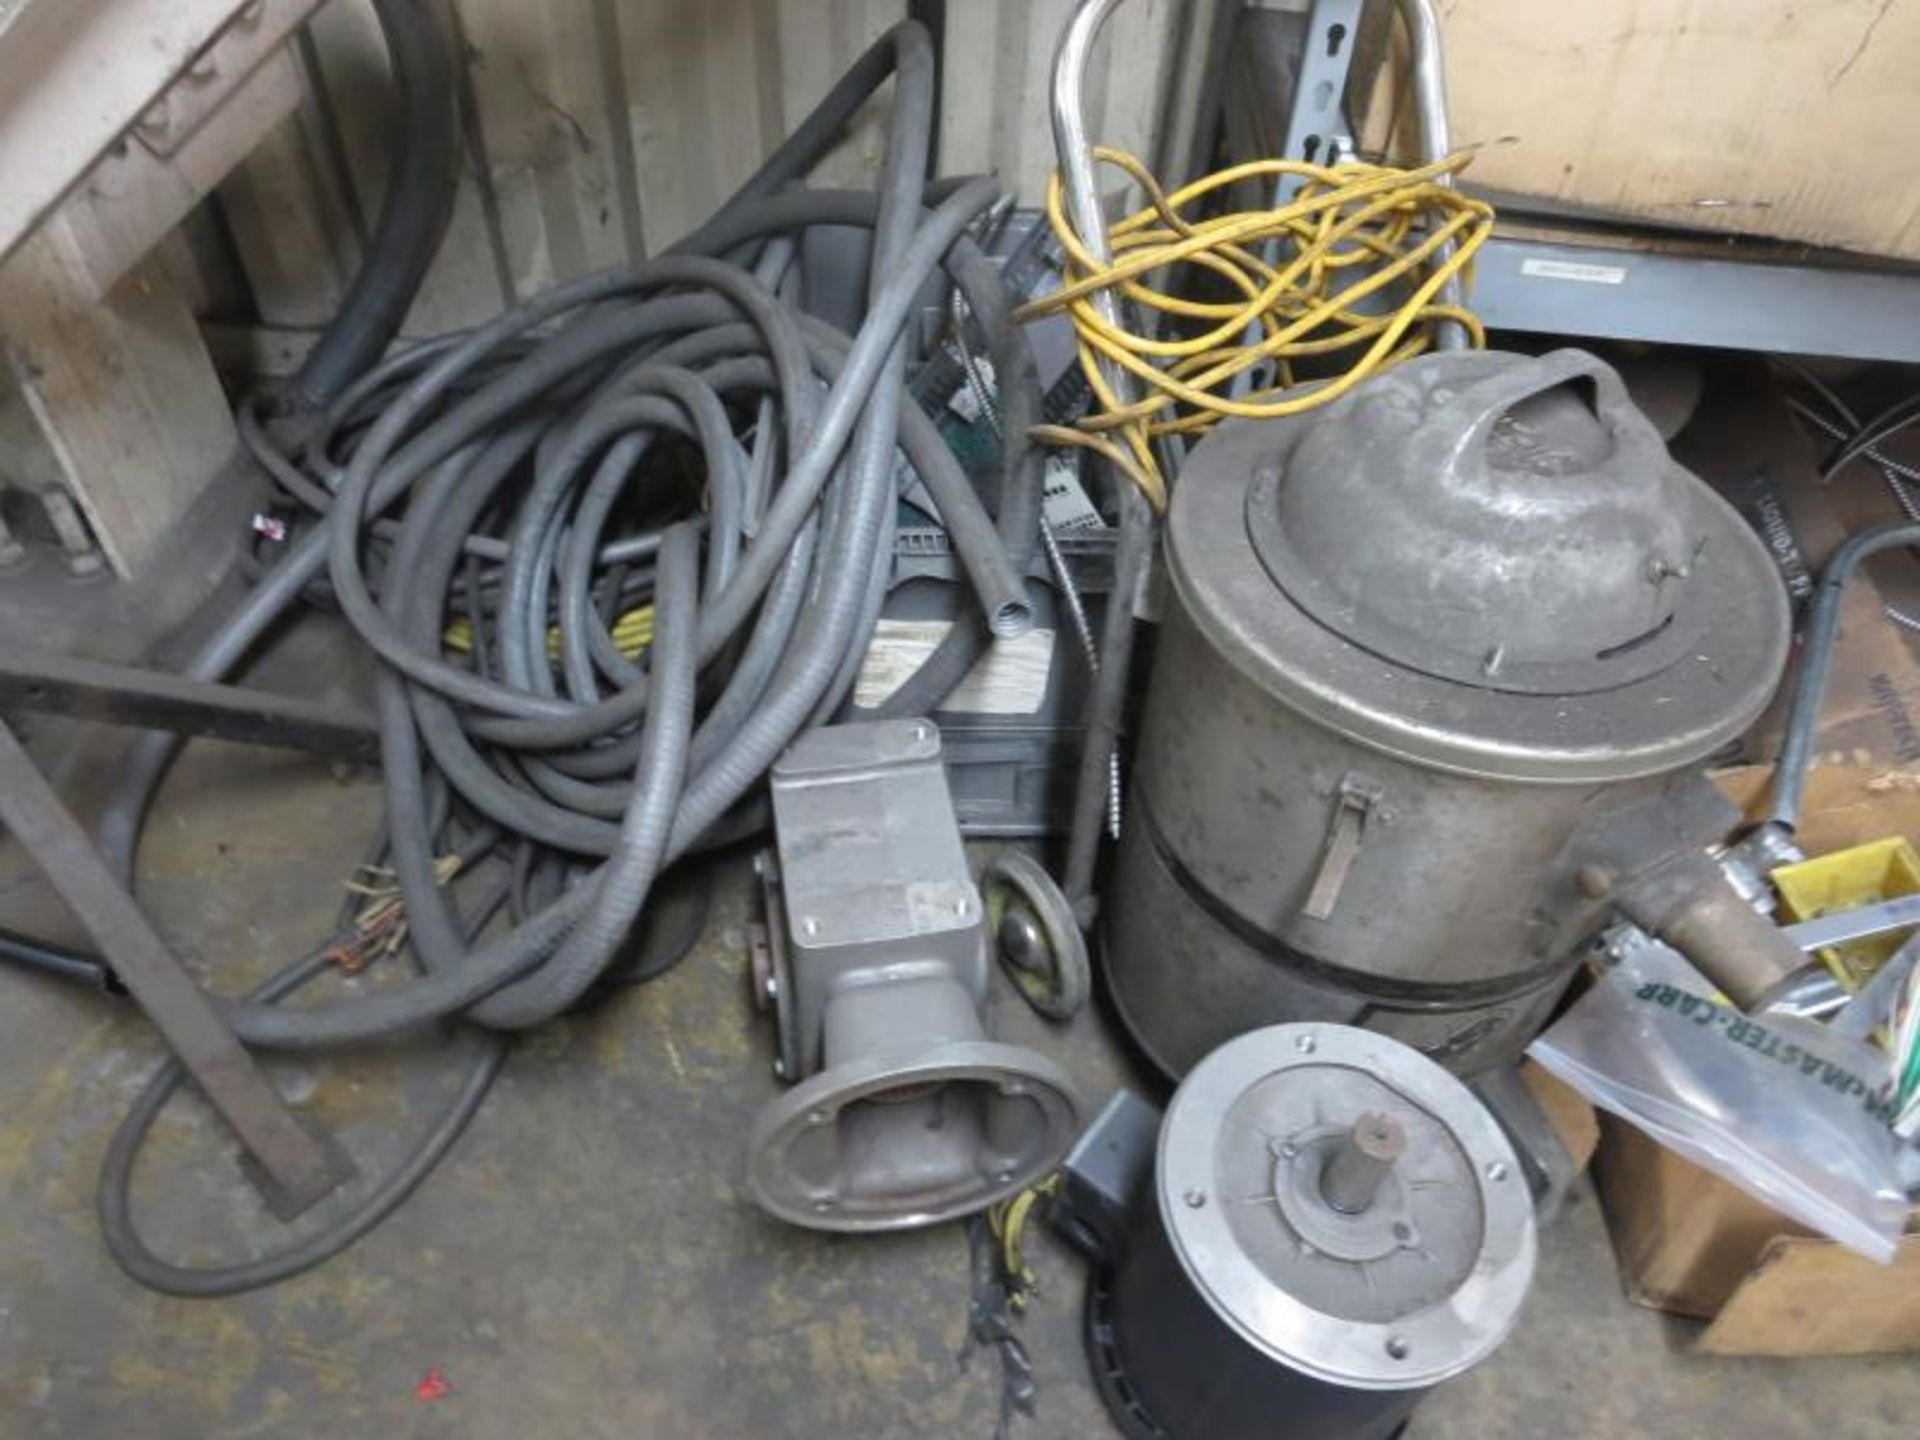 Electrical Parts. Contents of Corner Electrical wire, conduit fittings, Shop vac, 2- shelves, - Image 6 of 7